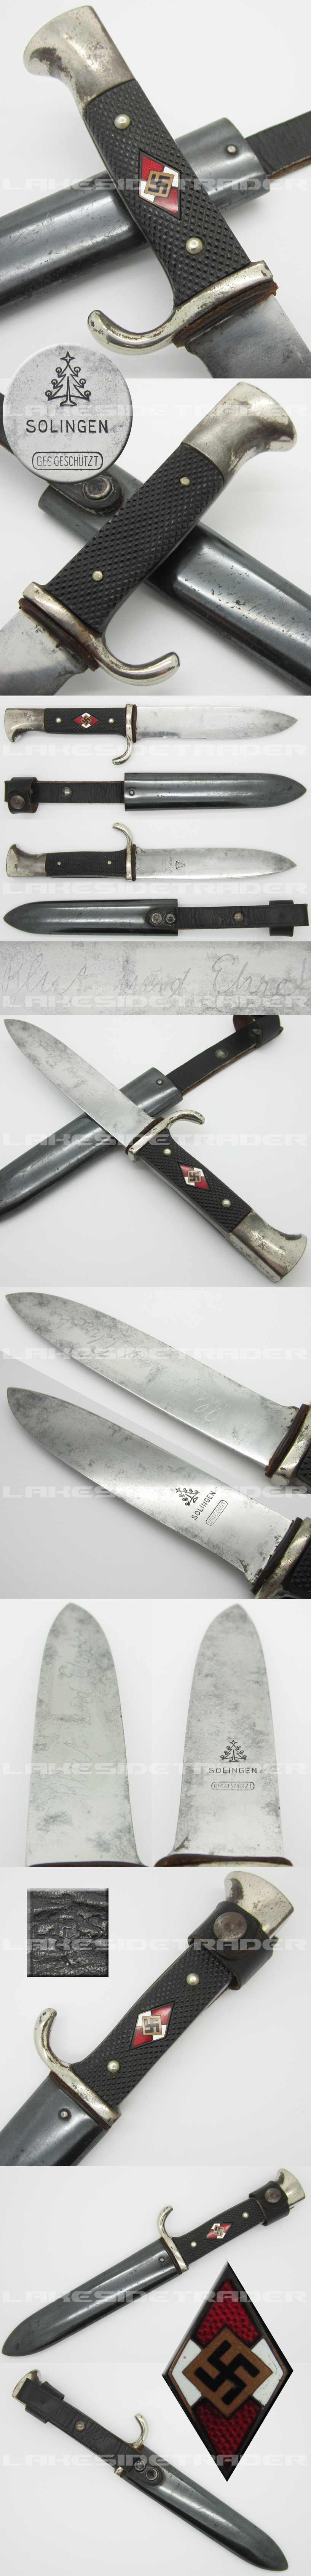 Early Hitler Youth Knife by W. Halbach